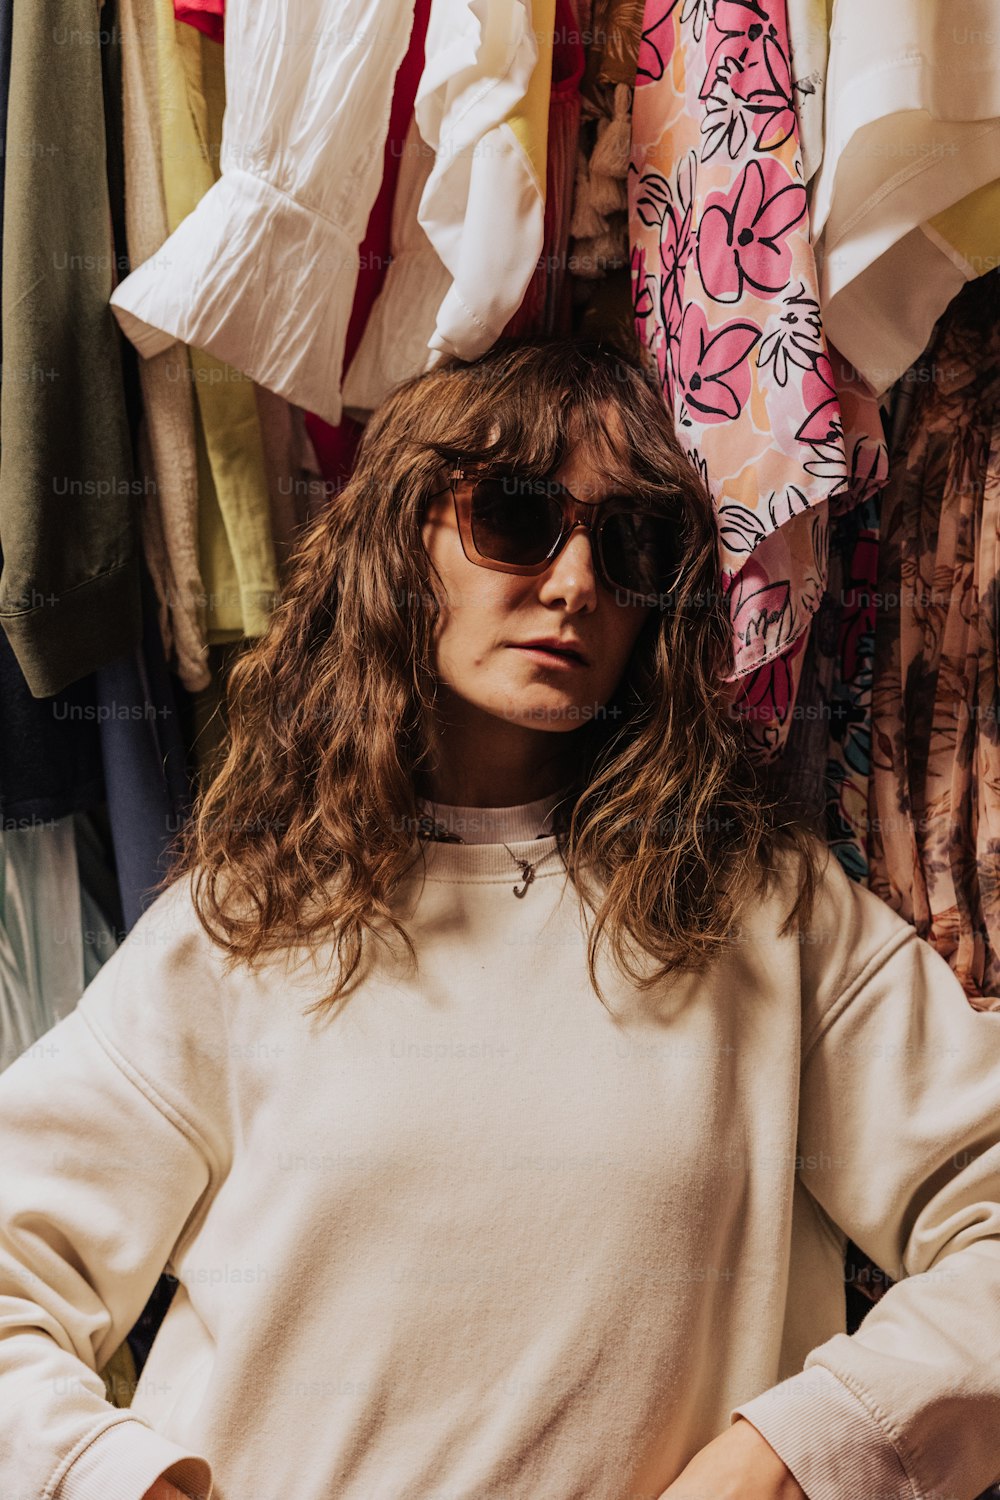 a woman wearing sunglasses standing in front of a rack of clothes